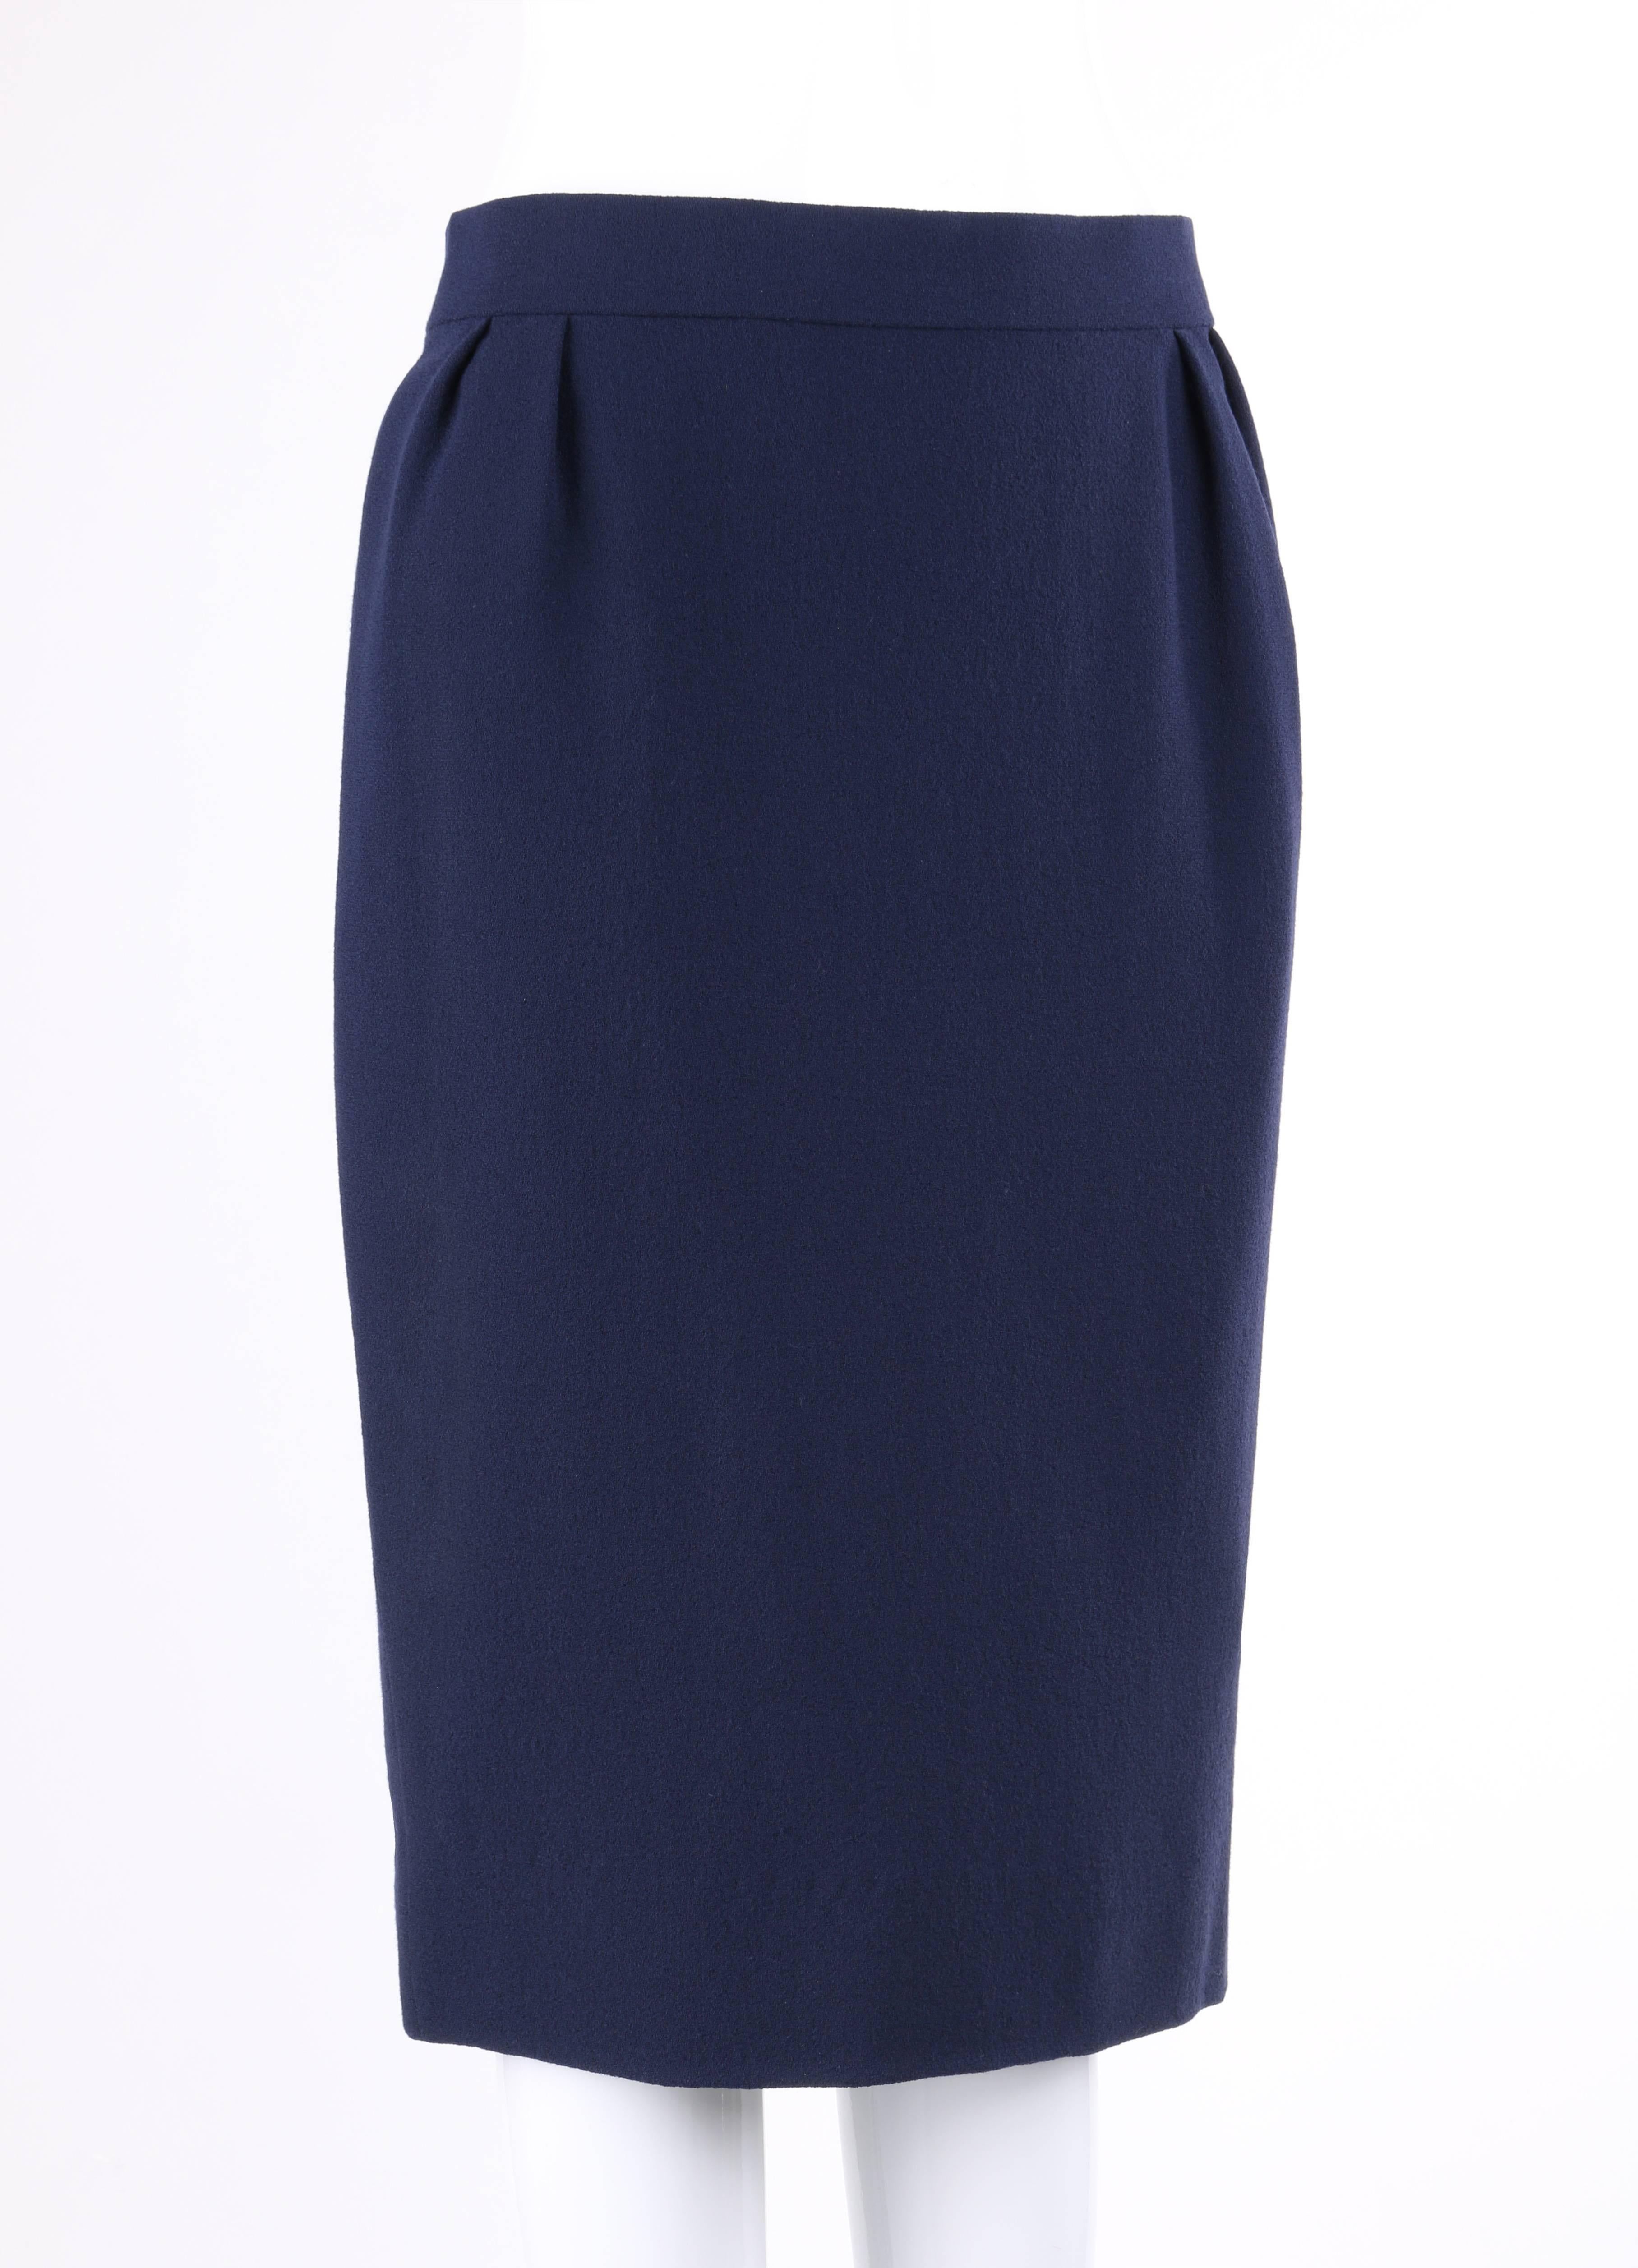 Pierre Cardin Haute Couture c.1990's classic navy blue pencil skirt. Banded waistline with four front and back knife pleats. Center back invisible zipper with two hook and eye closures at top. Fully lined. Unmarked Fabric Content: Shell: Wool or